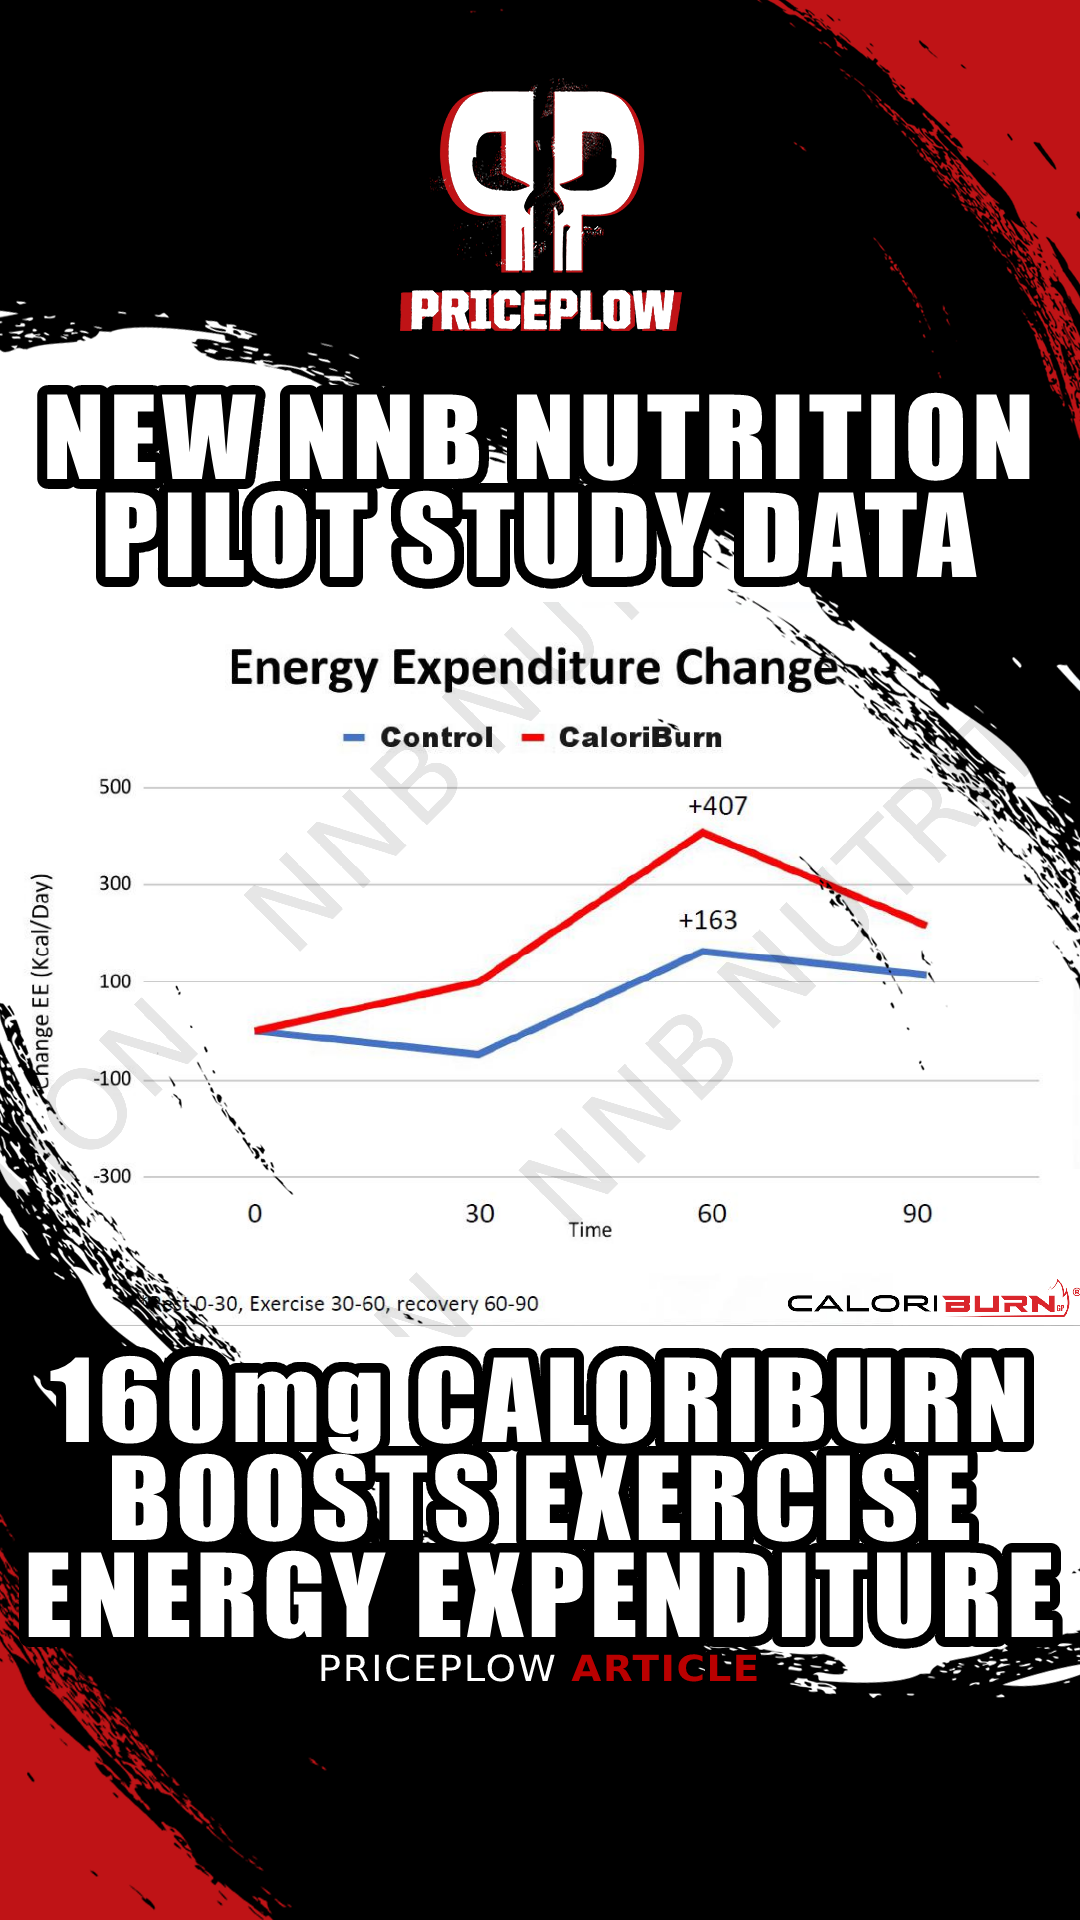 NNB Nutrition CaloriBurn GP Pilot Data: 160mg Greatly Increases Exercise-Based Energy Expenditure